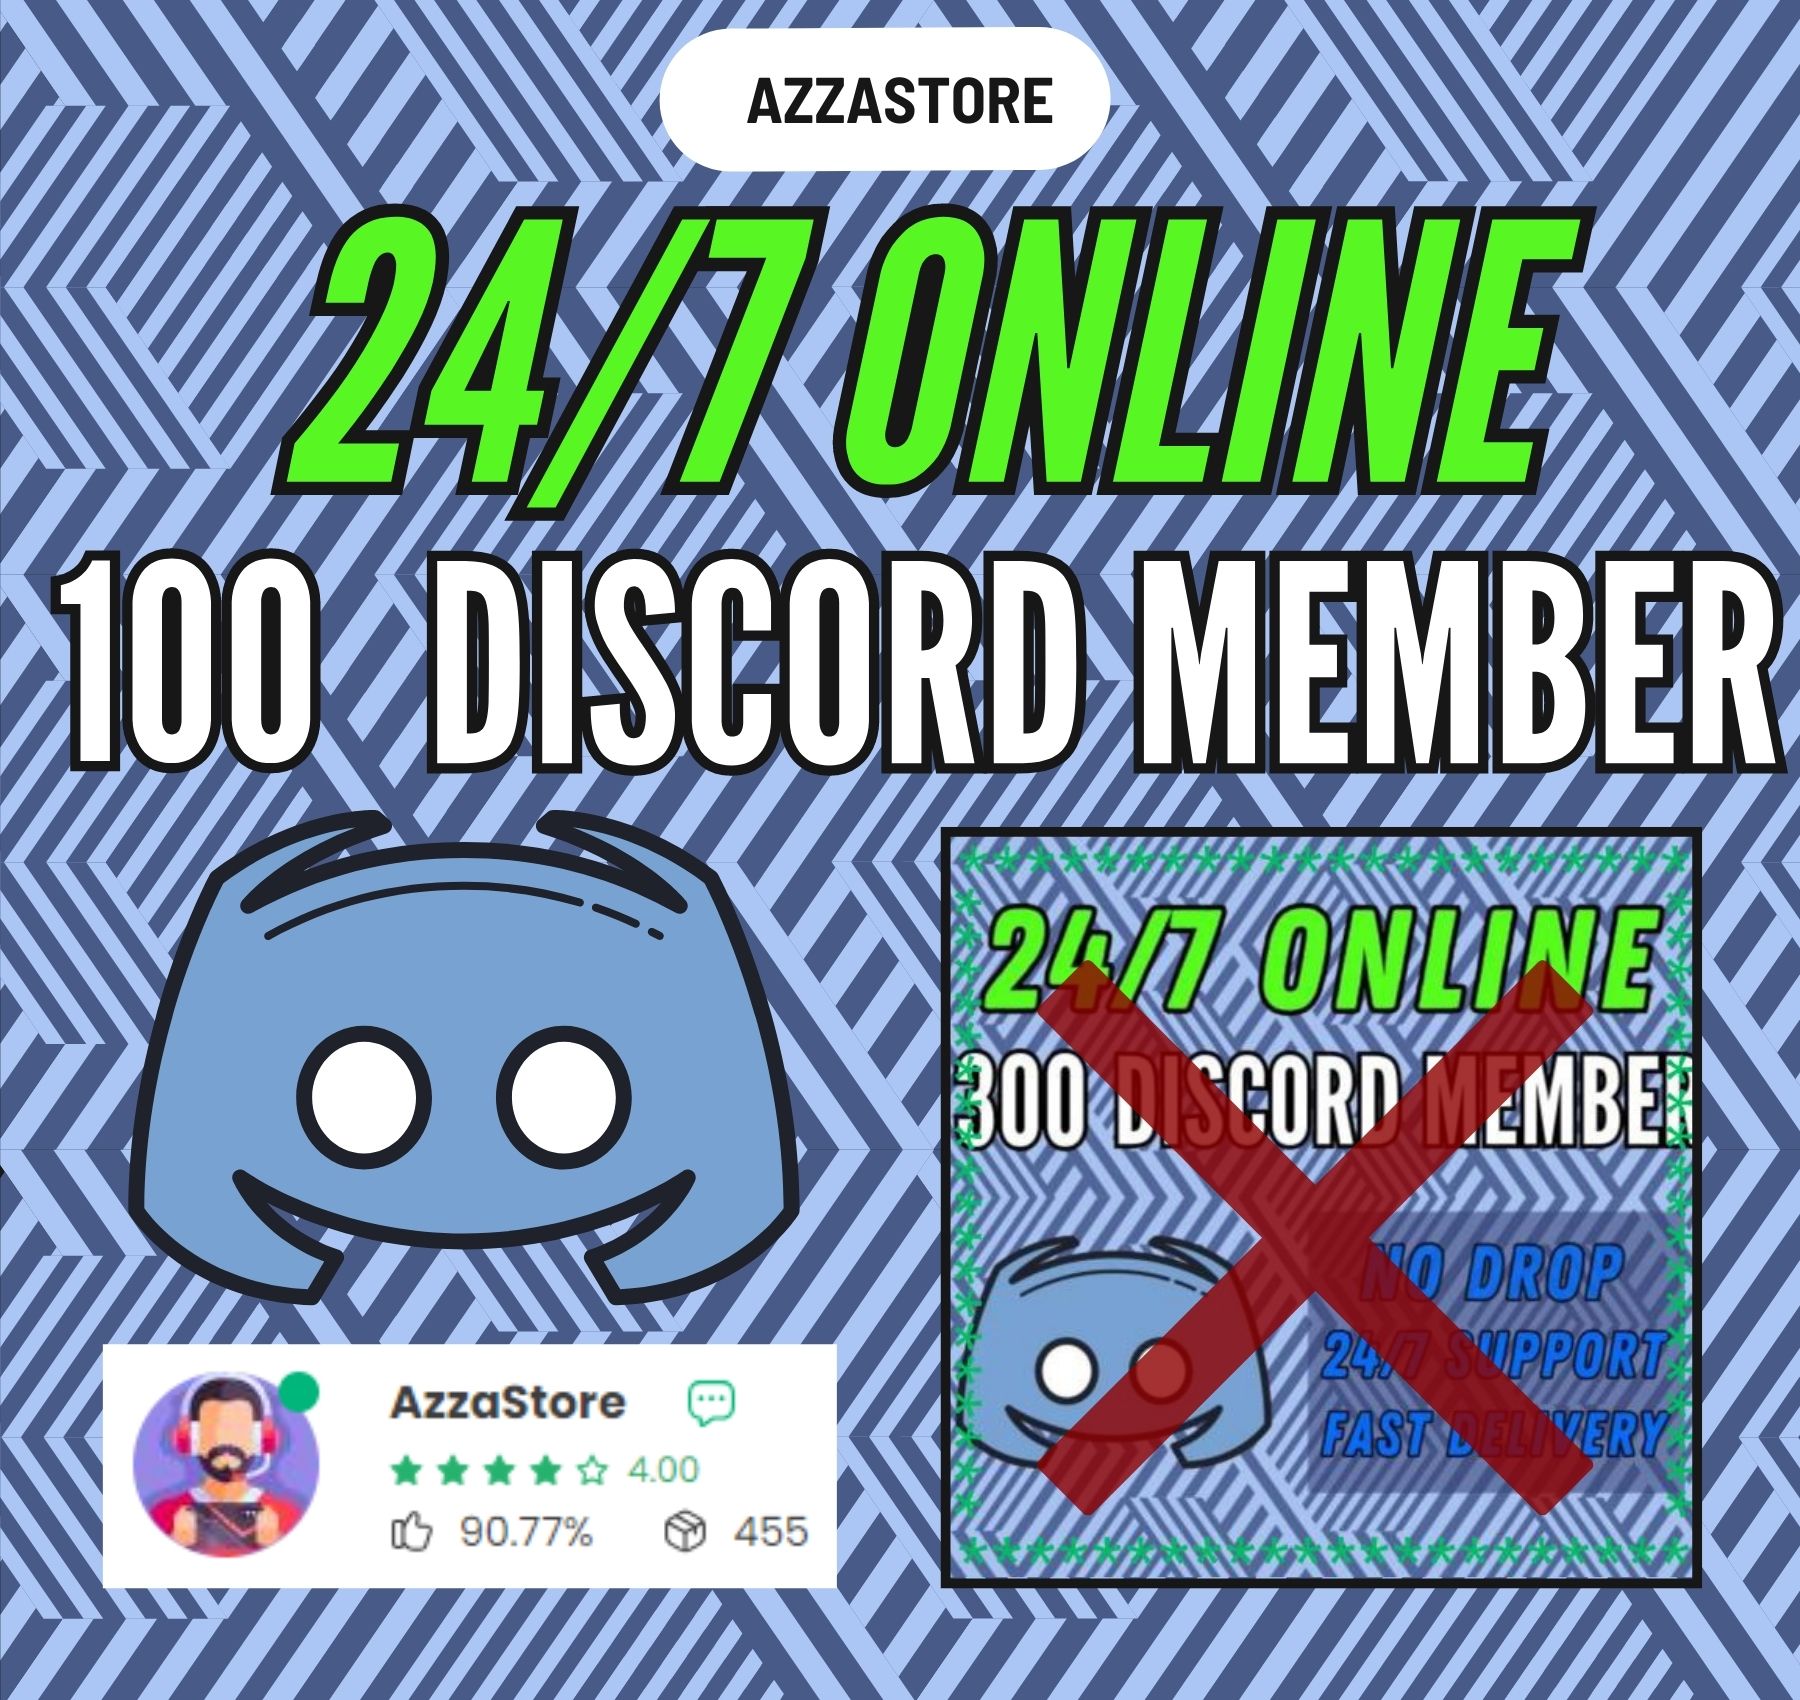  100 DiscorD Online Member DiscorD Online Member - with High-Quality & lowest prices.